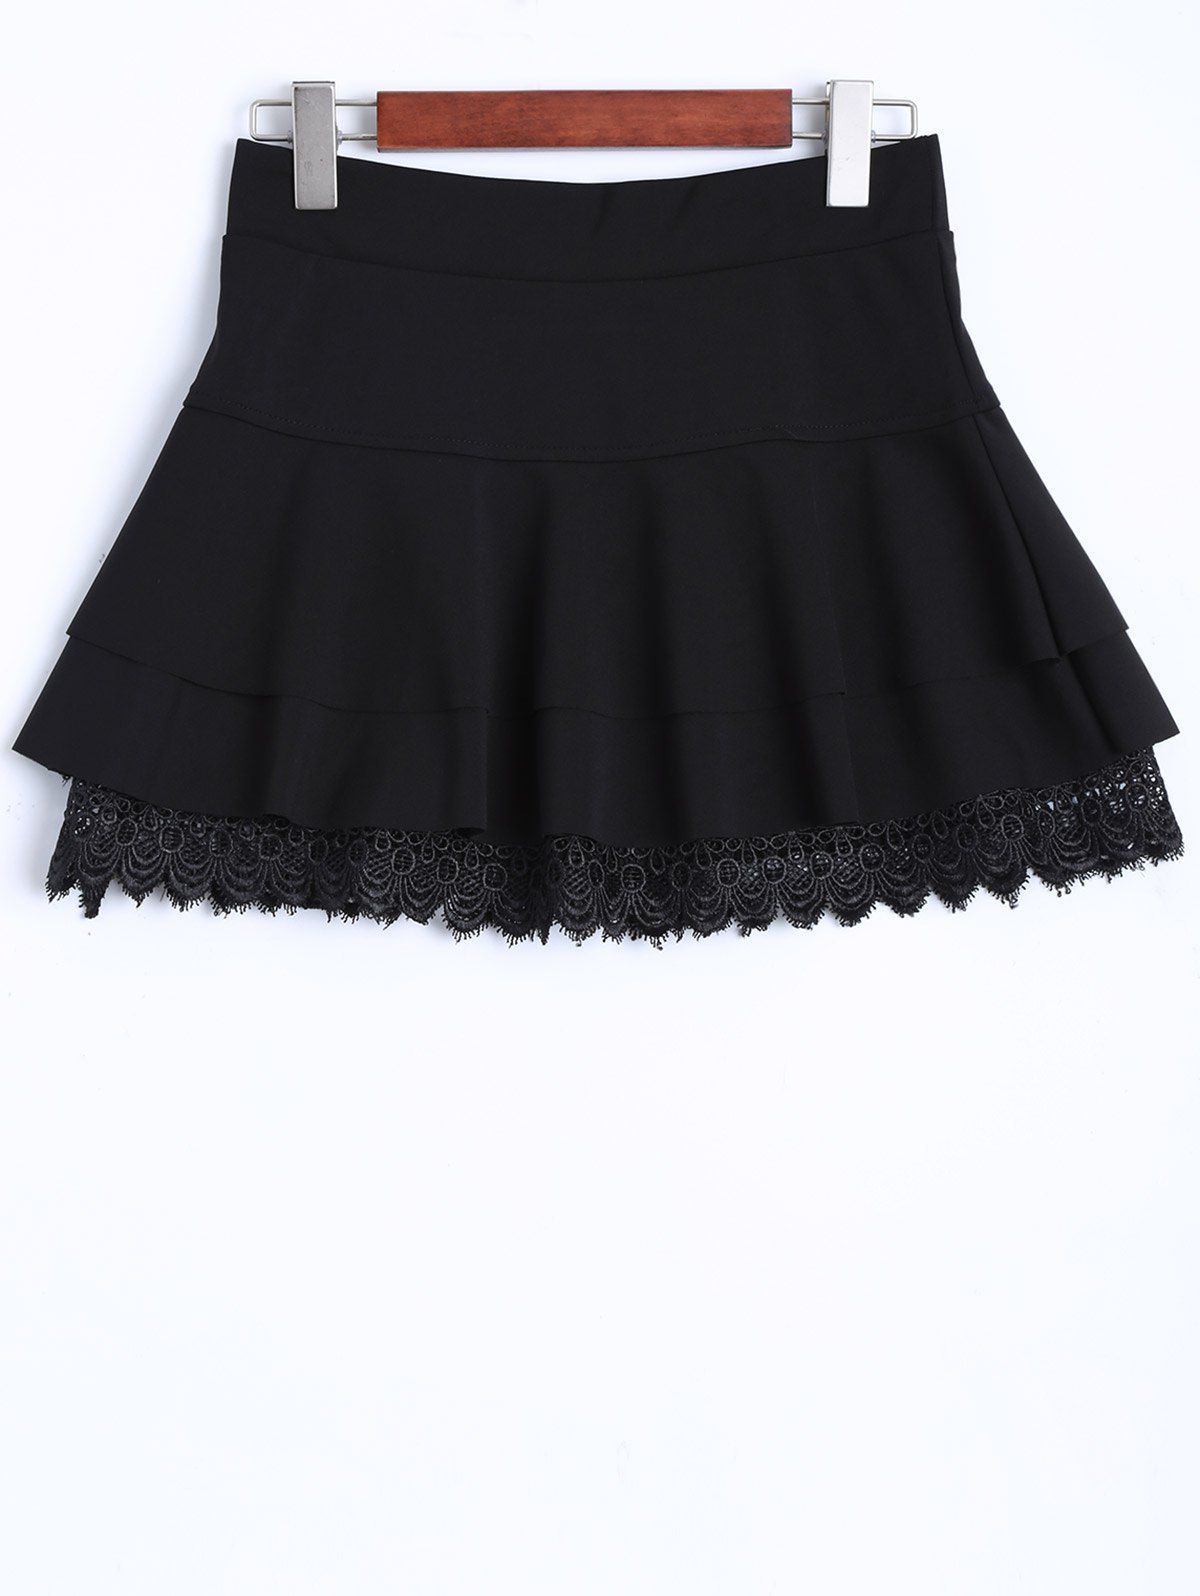 [4% OFF] Concise Lace Insert Tiered Mini Skirt | Rosegal